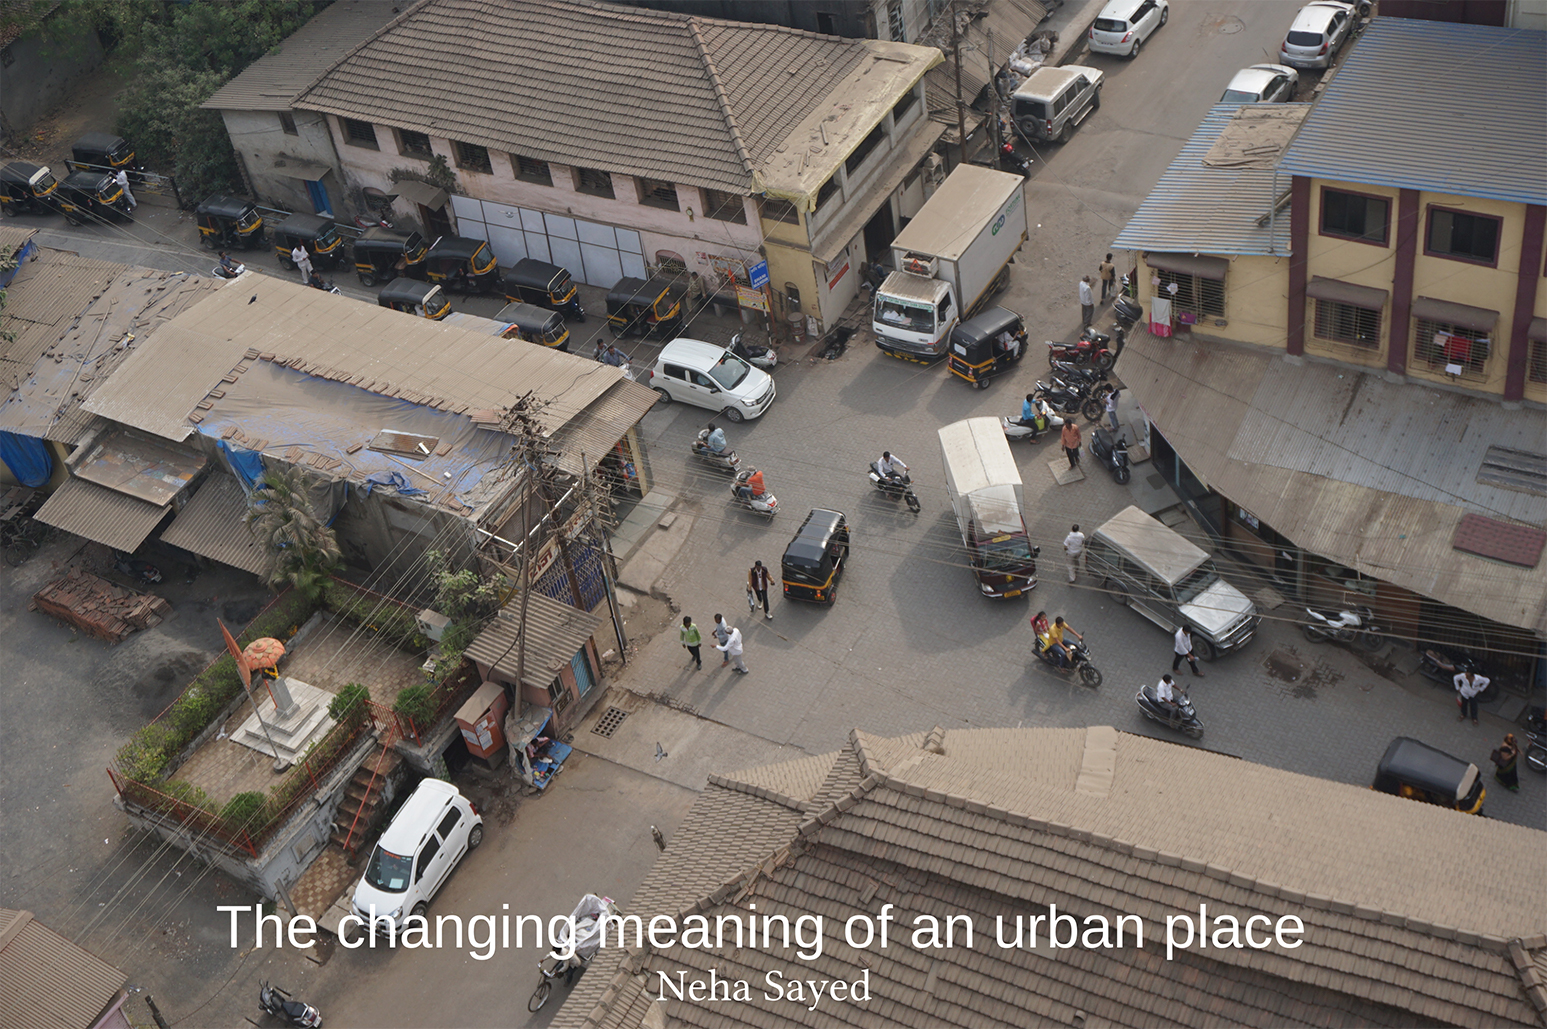 Image related to Neha Sayed's dissertation "The Changing Meaning of an Urban Place". A busy street crossing view from India.